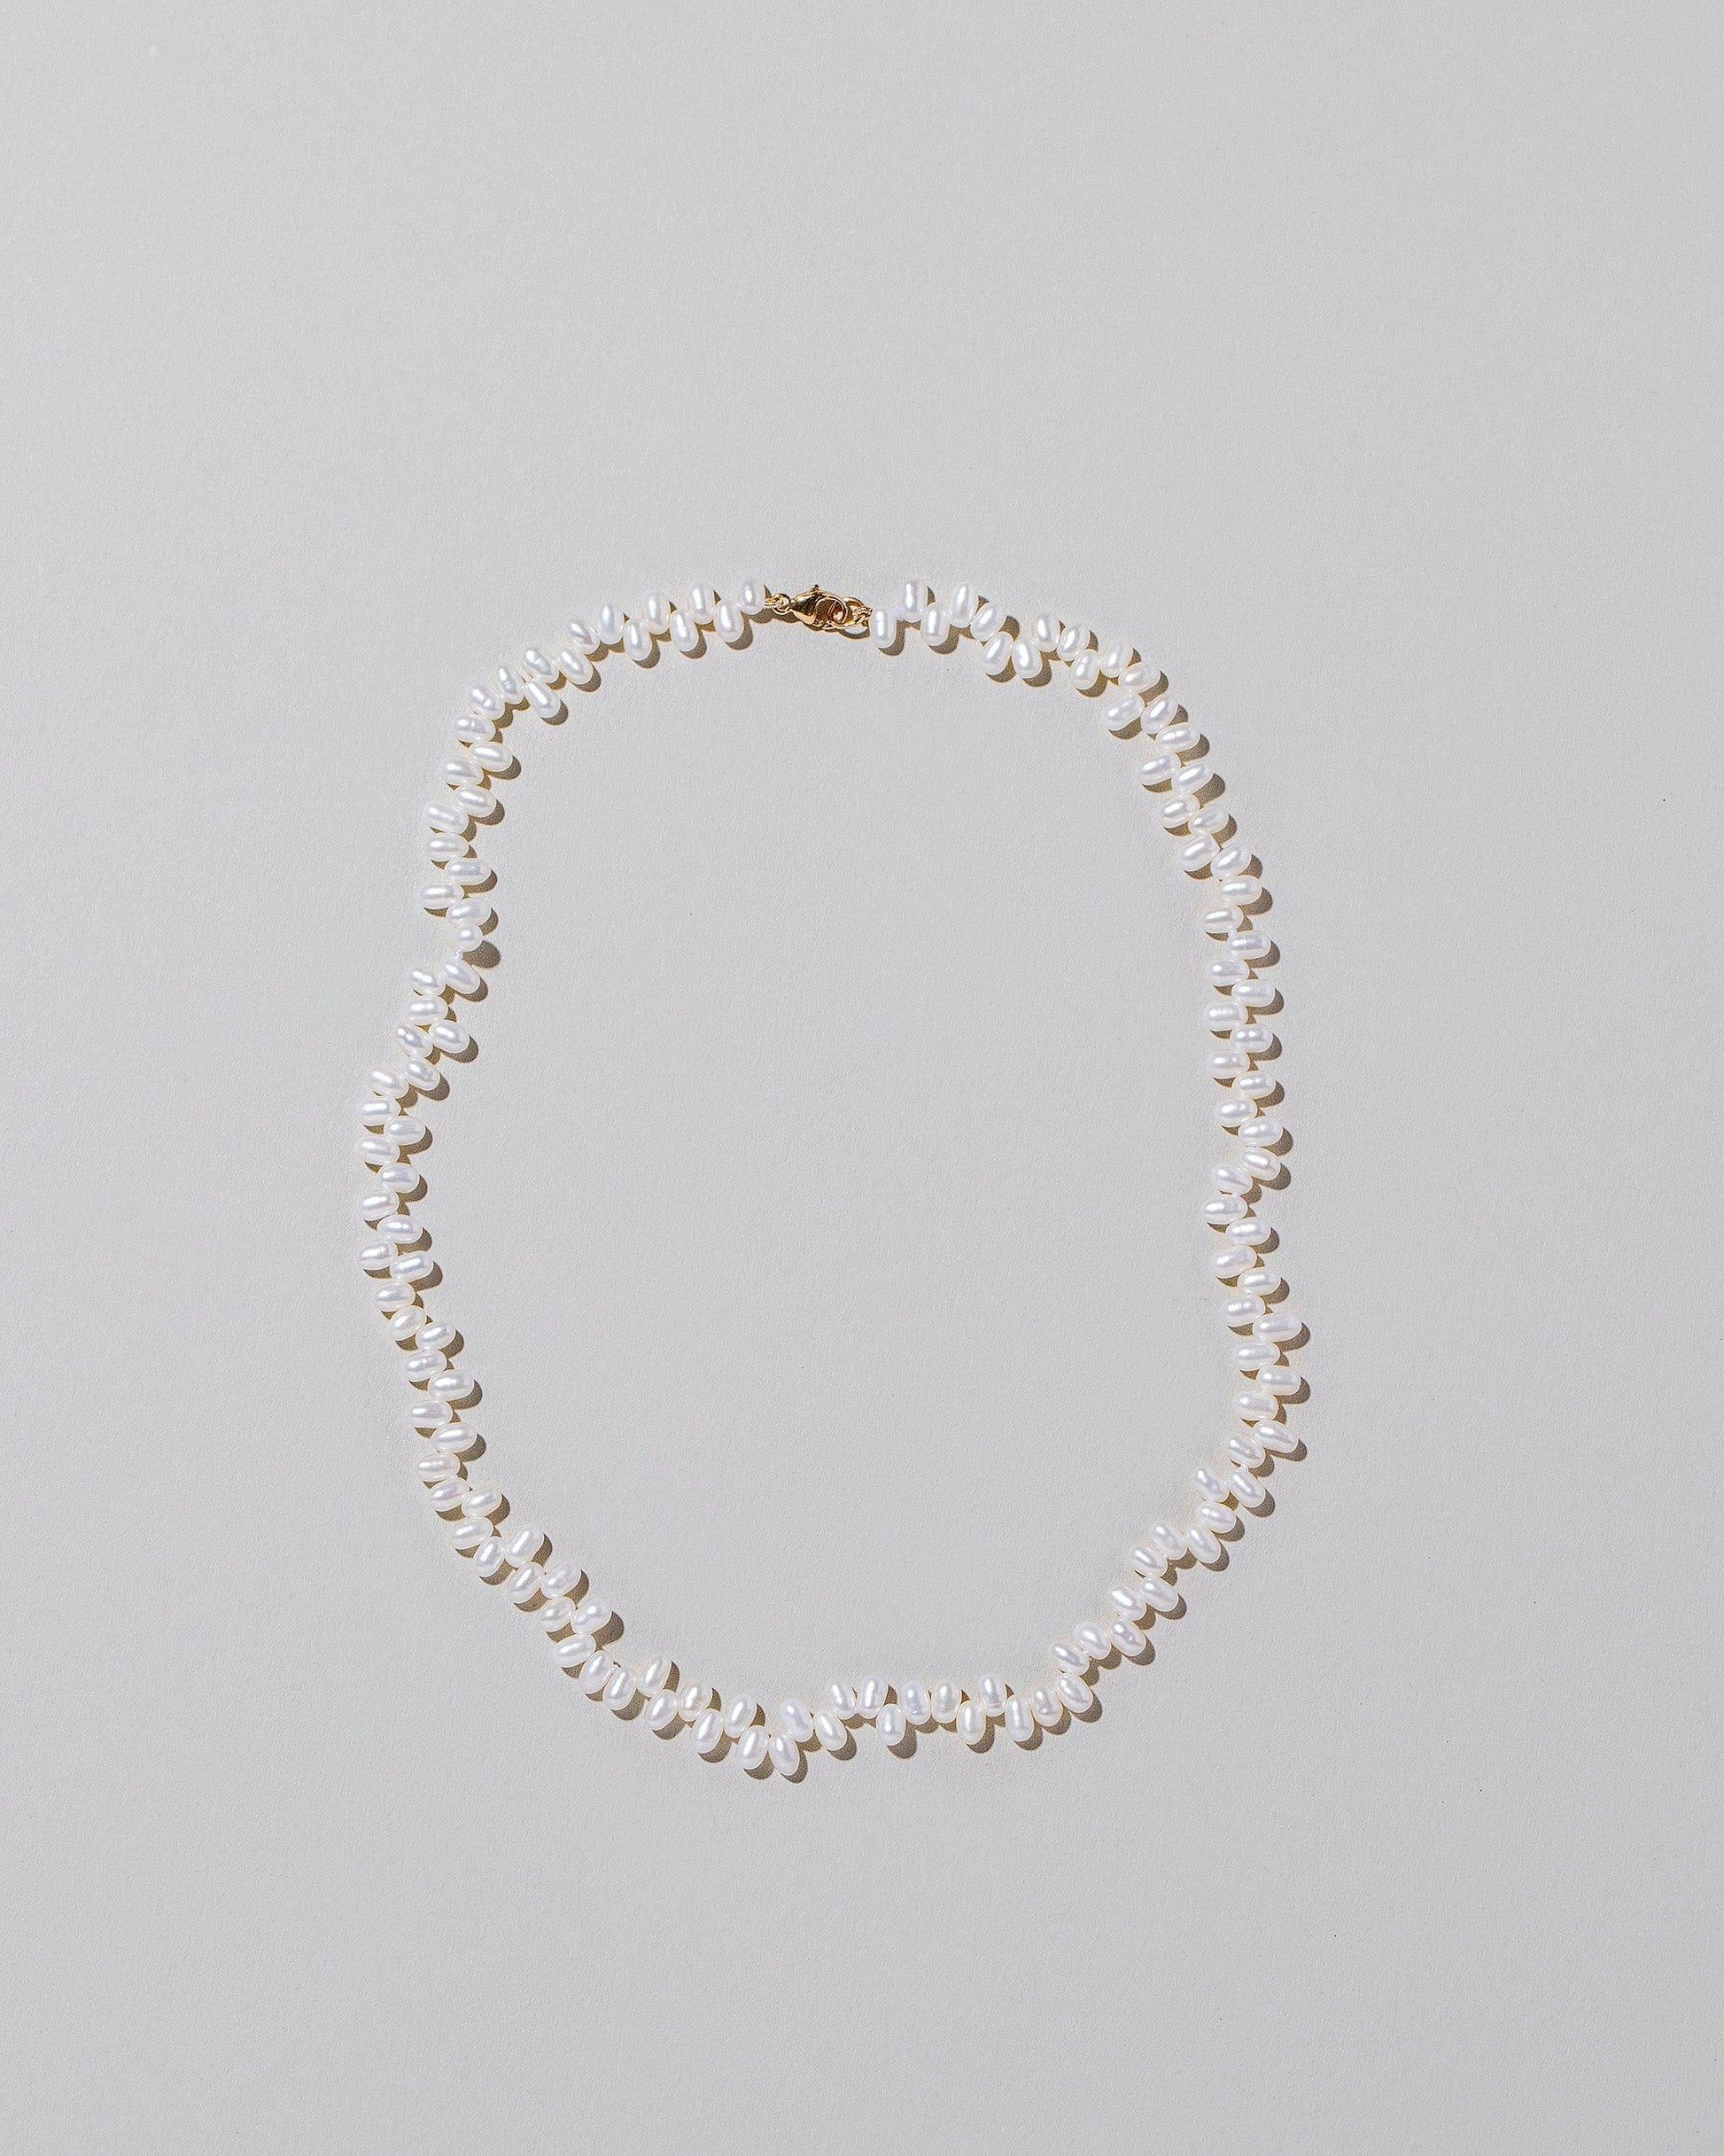 Small Zipper Pearl Necklace on light color background.